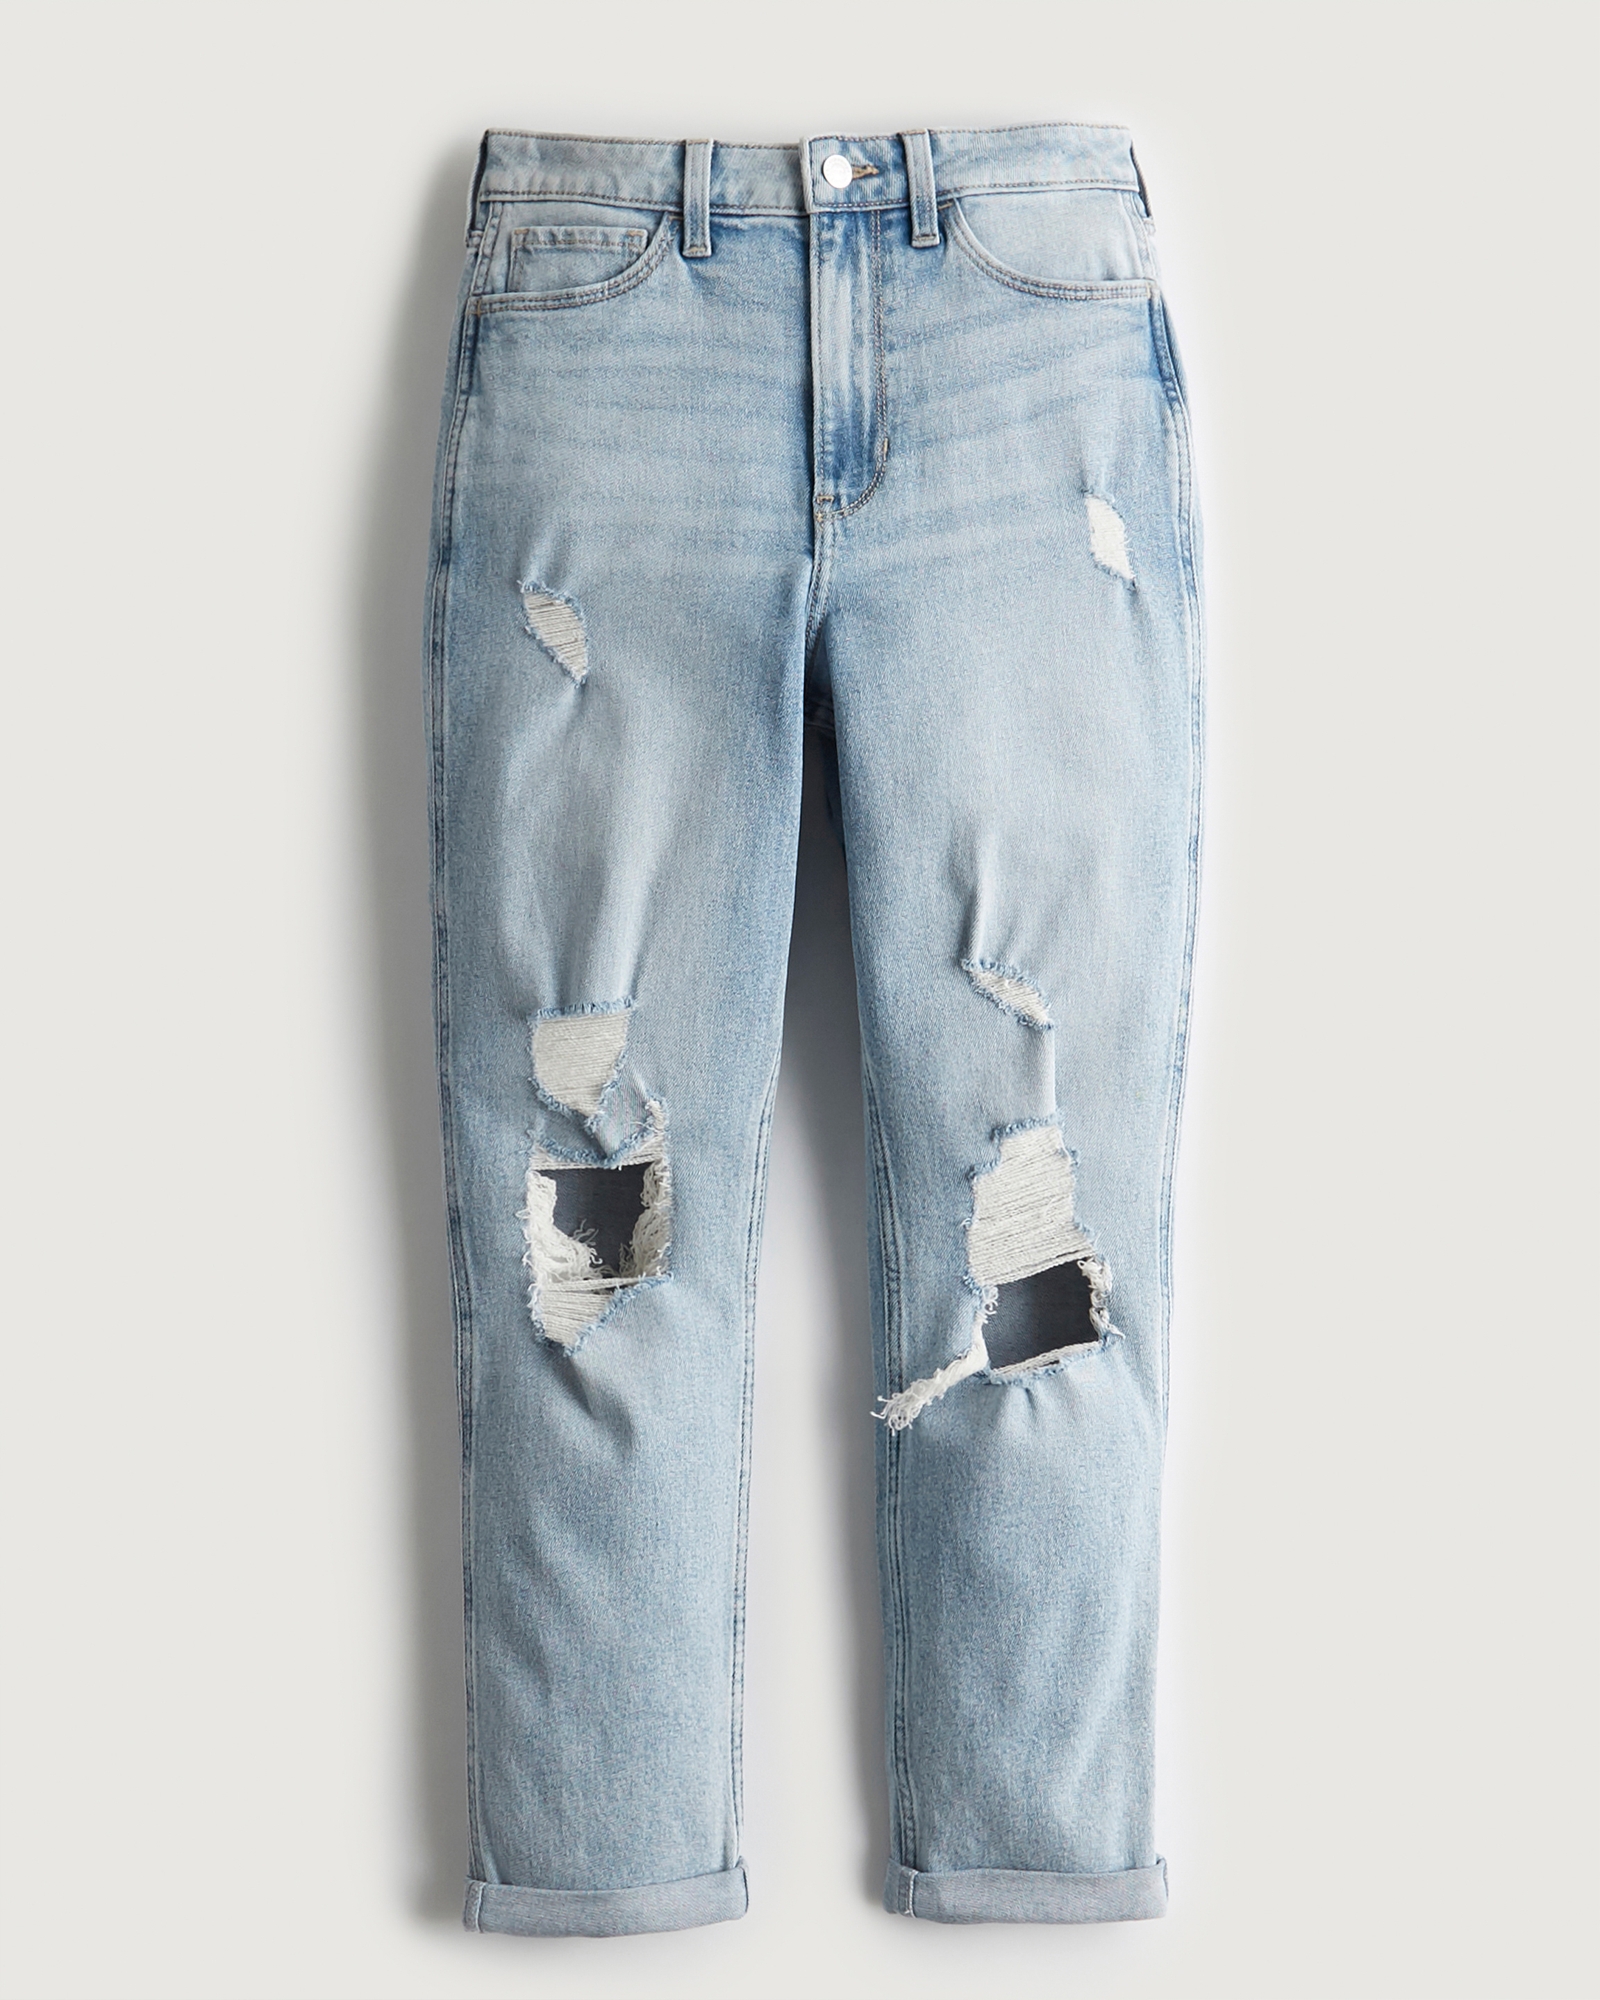 https://img.hollisterco.com/is/image/anf/KIC_355-2102-6327-281_prod1.jpg?policy=product-extra-large